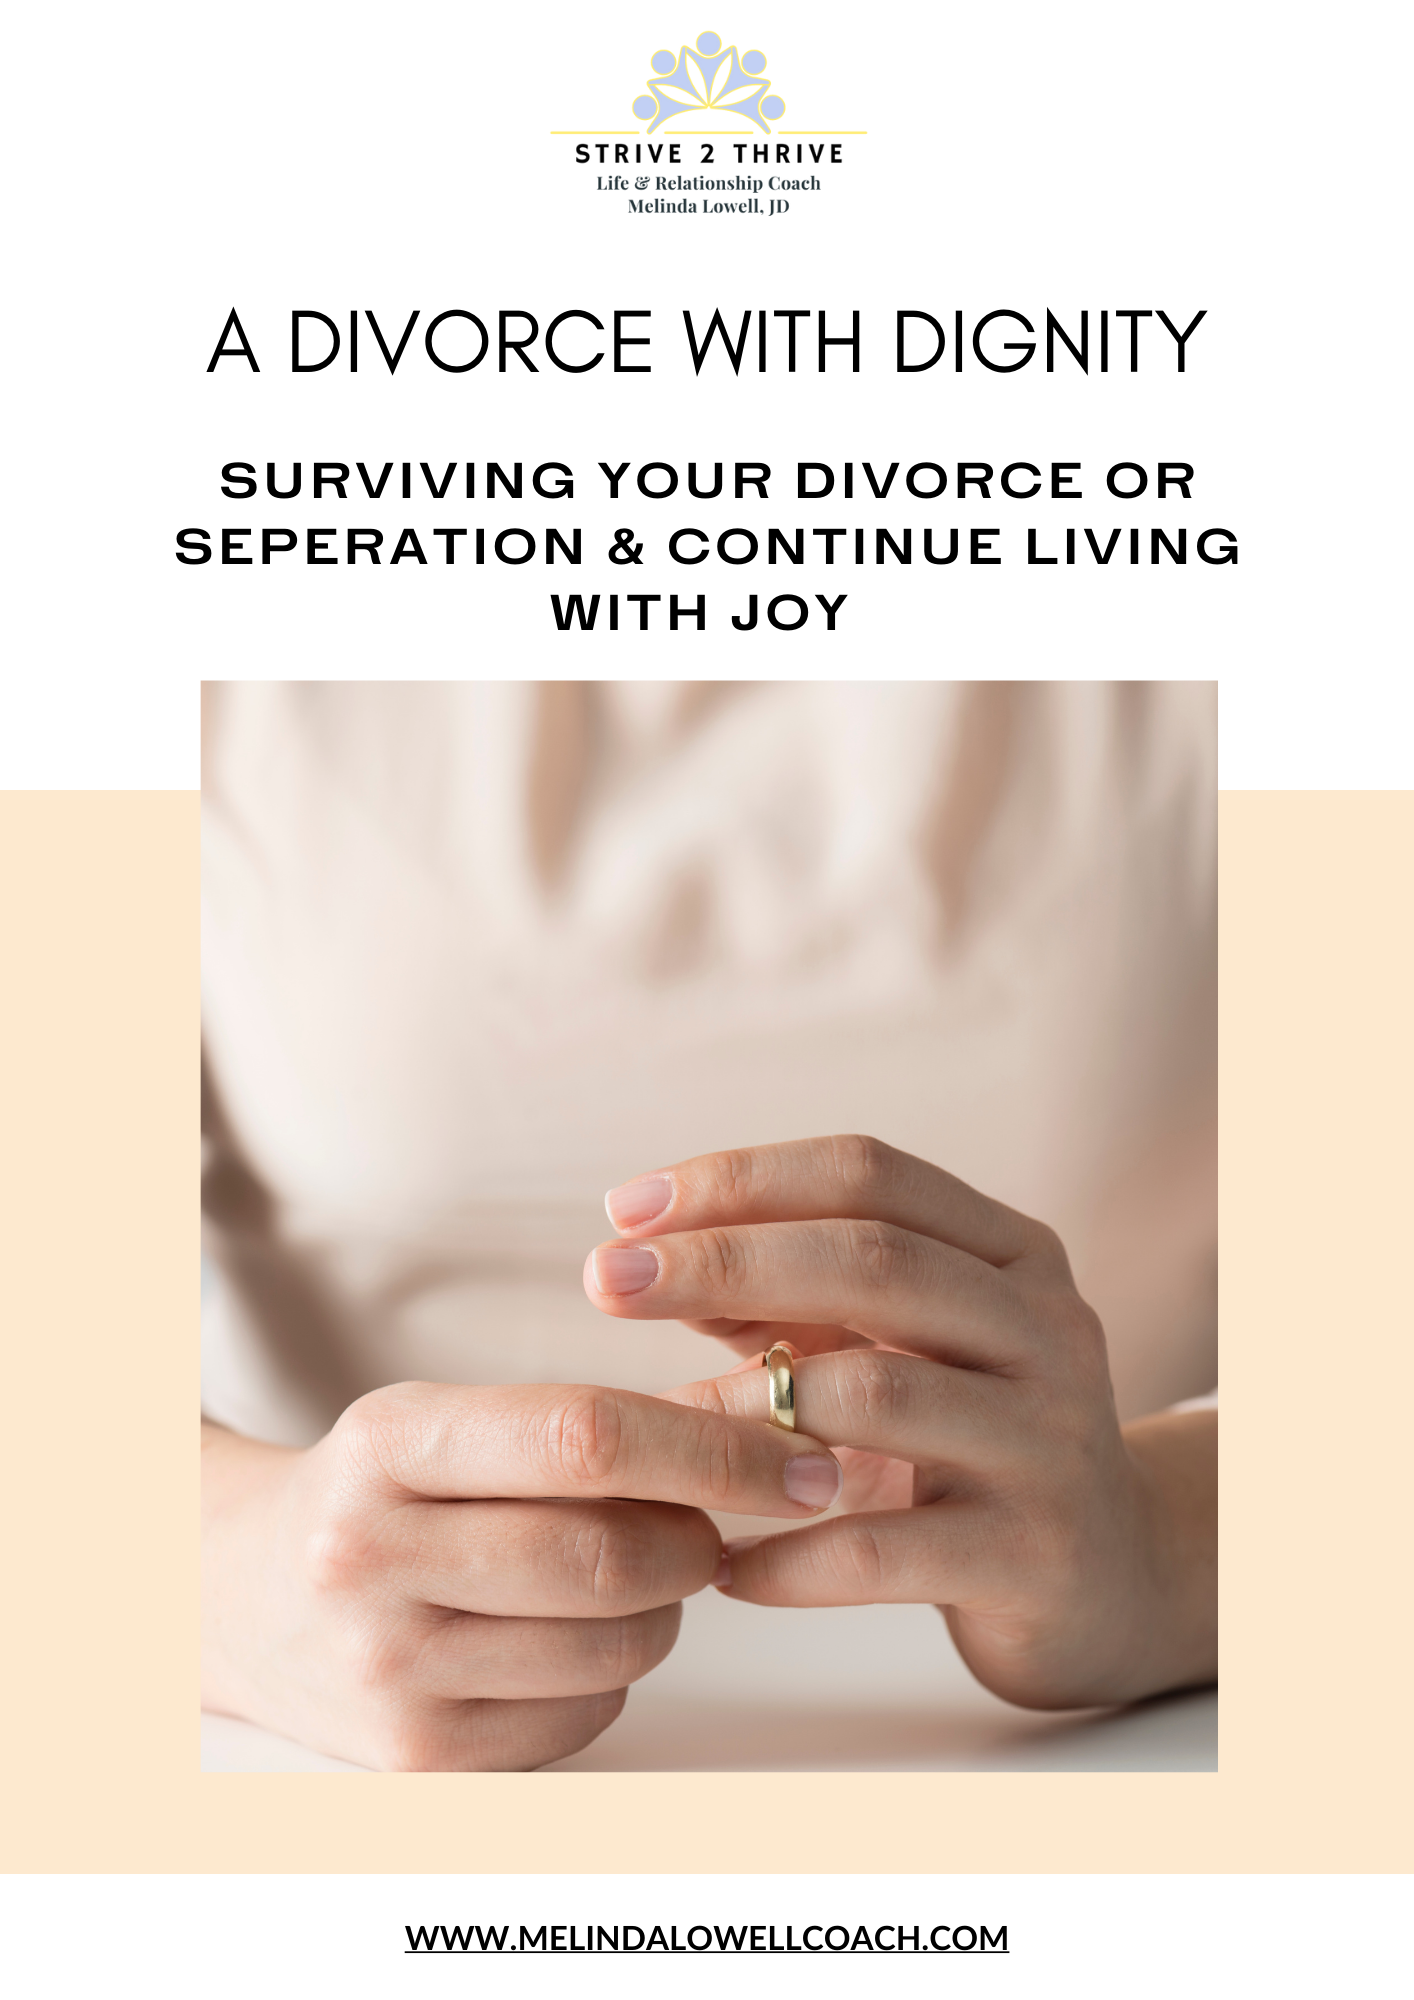 A divorce with dignityebook for lead magnet